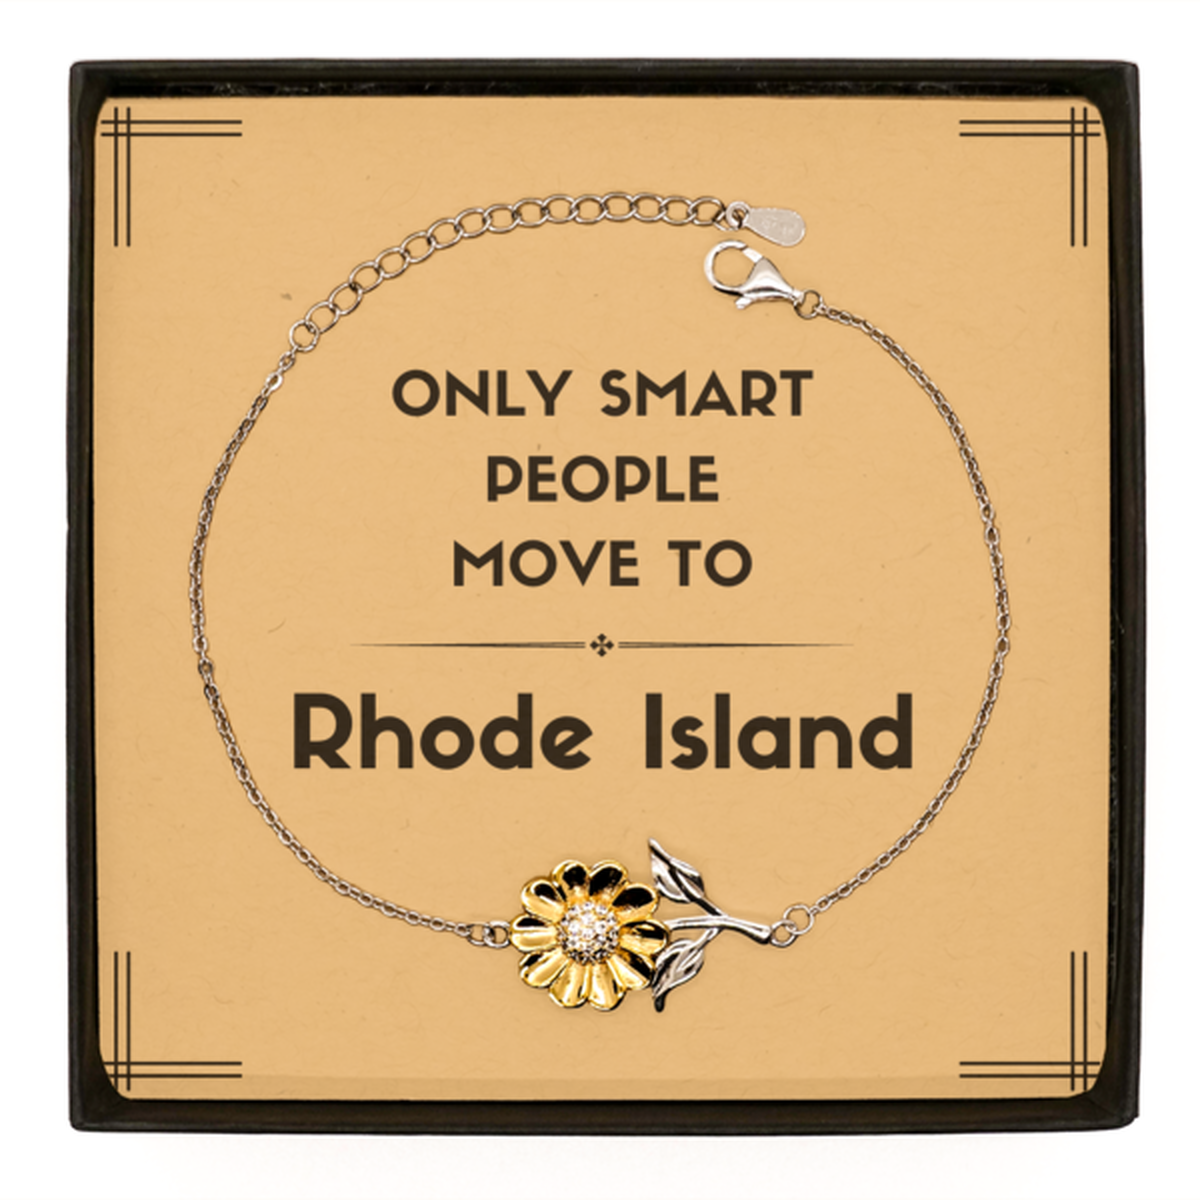 Only smart people move to Rhode Island Sunflower Bracelet, Message Card Gifts For Rhode Island, Move to Rhode Island Gifts for Friends Coworker Funny Saying Quote